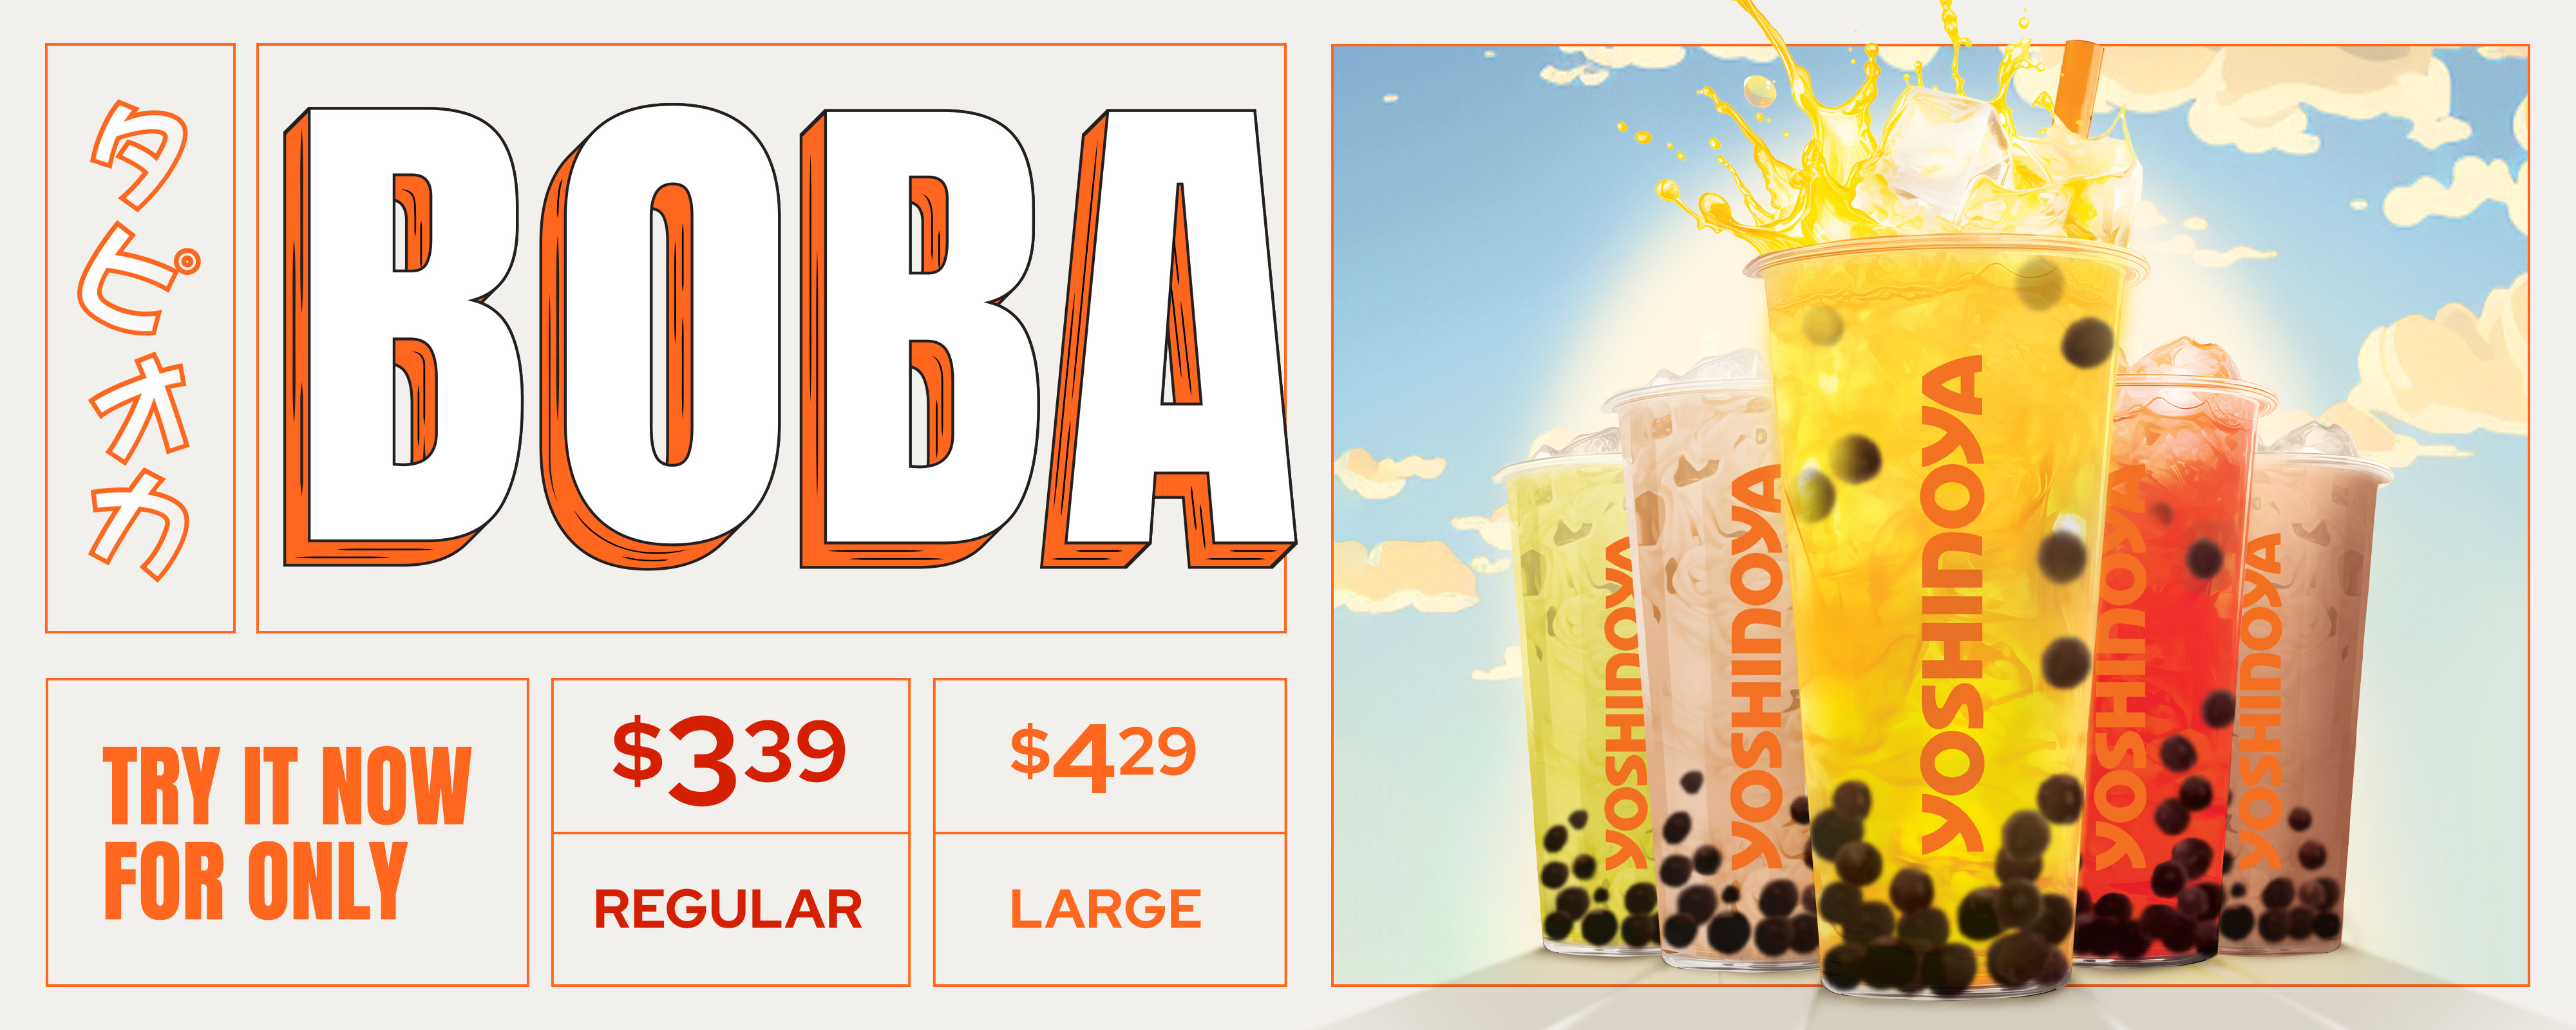 BOBA TRY IT NOW FOR ONLY - $3.39 REGULAR $4.29 LARGE